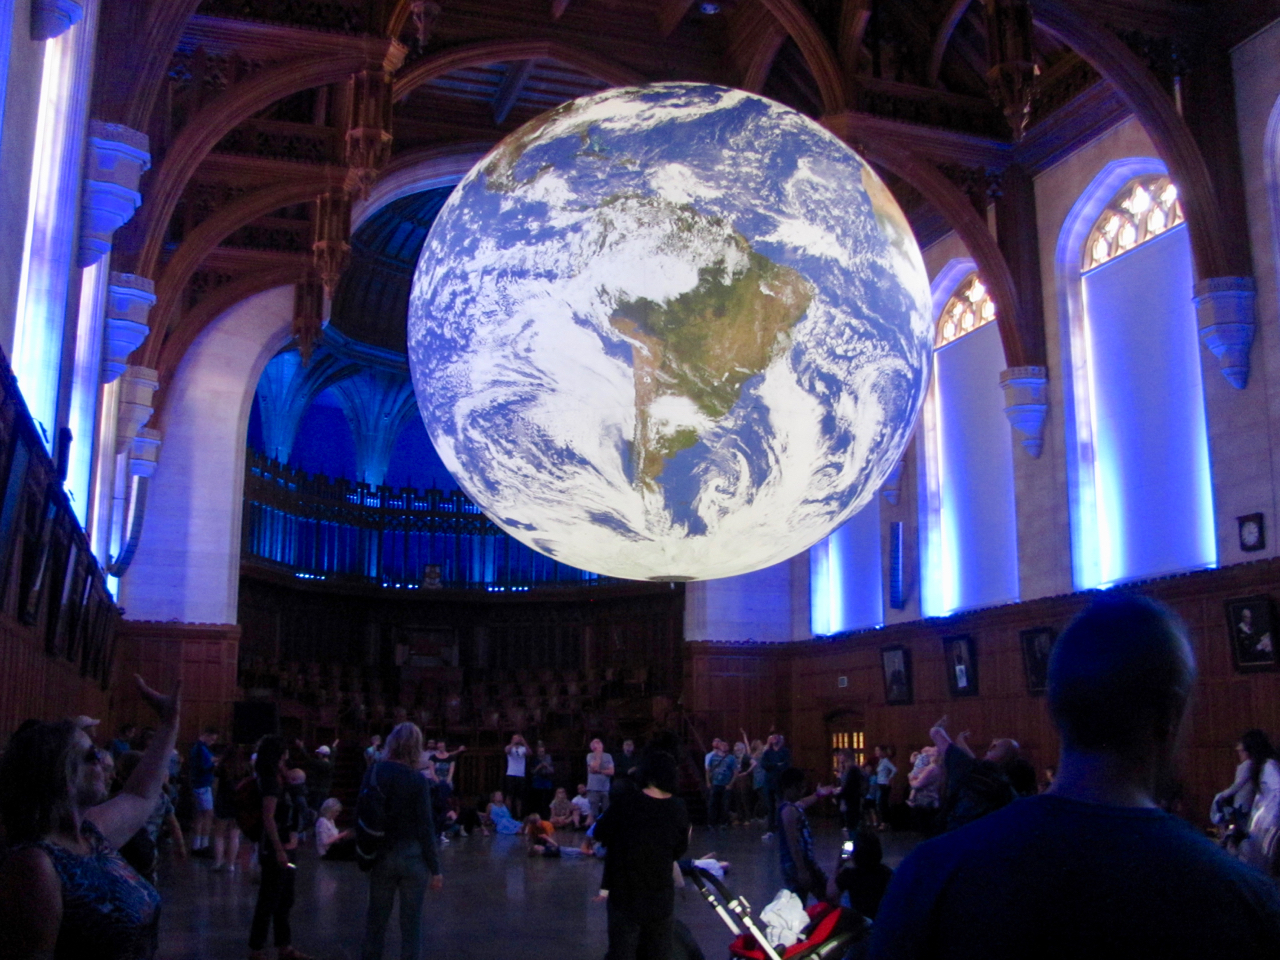 The Gaia Globe in the Great Hall in the Wills Building, Bristol University.